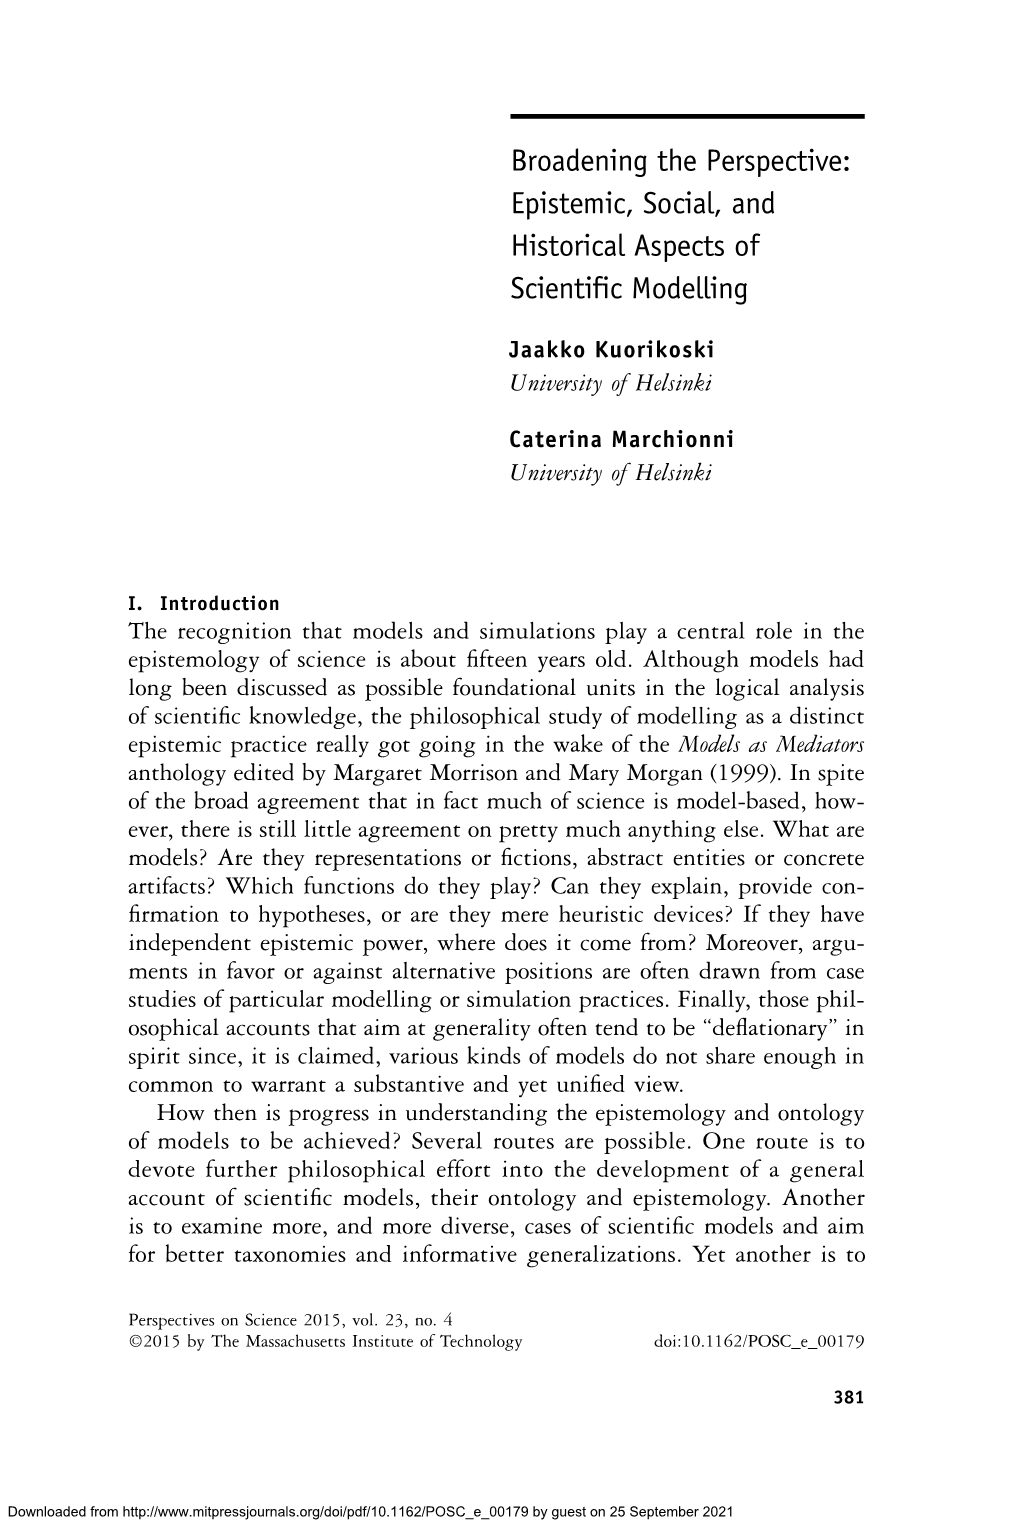 Epistemic, Social, and Historical Aspects of Scientific Modelling